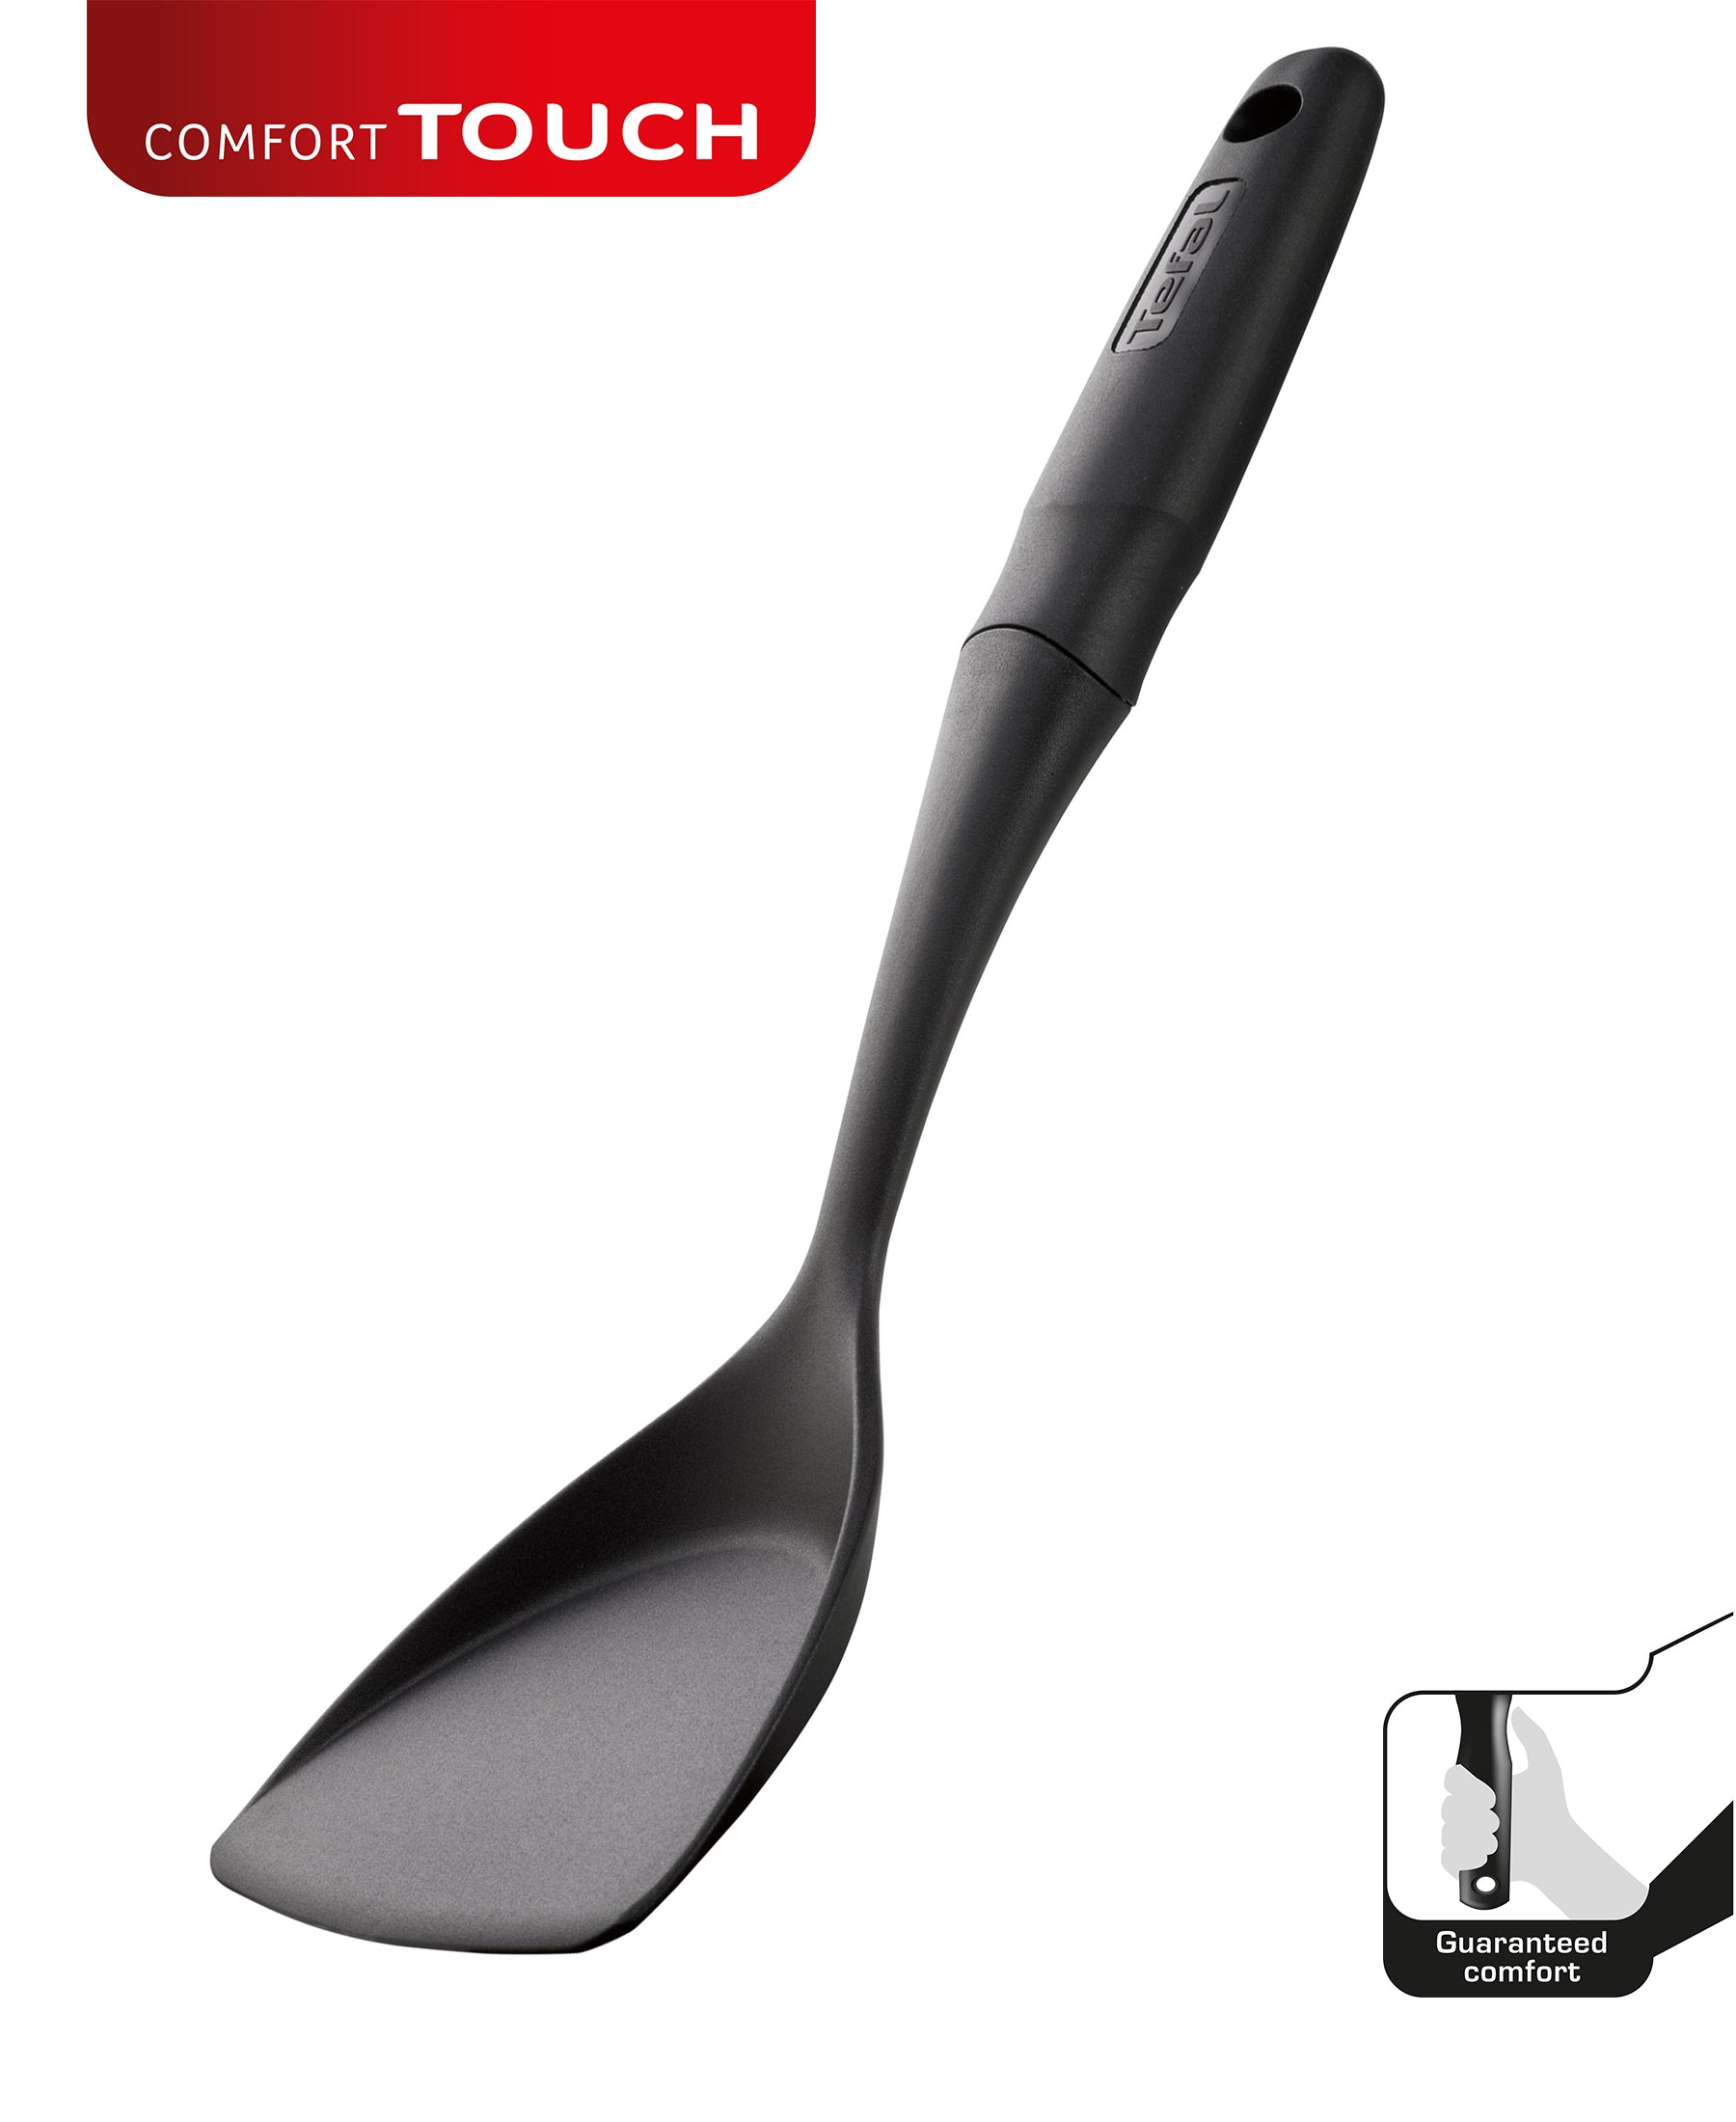 Tefal Comfort Touch Work Spatula - Black